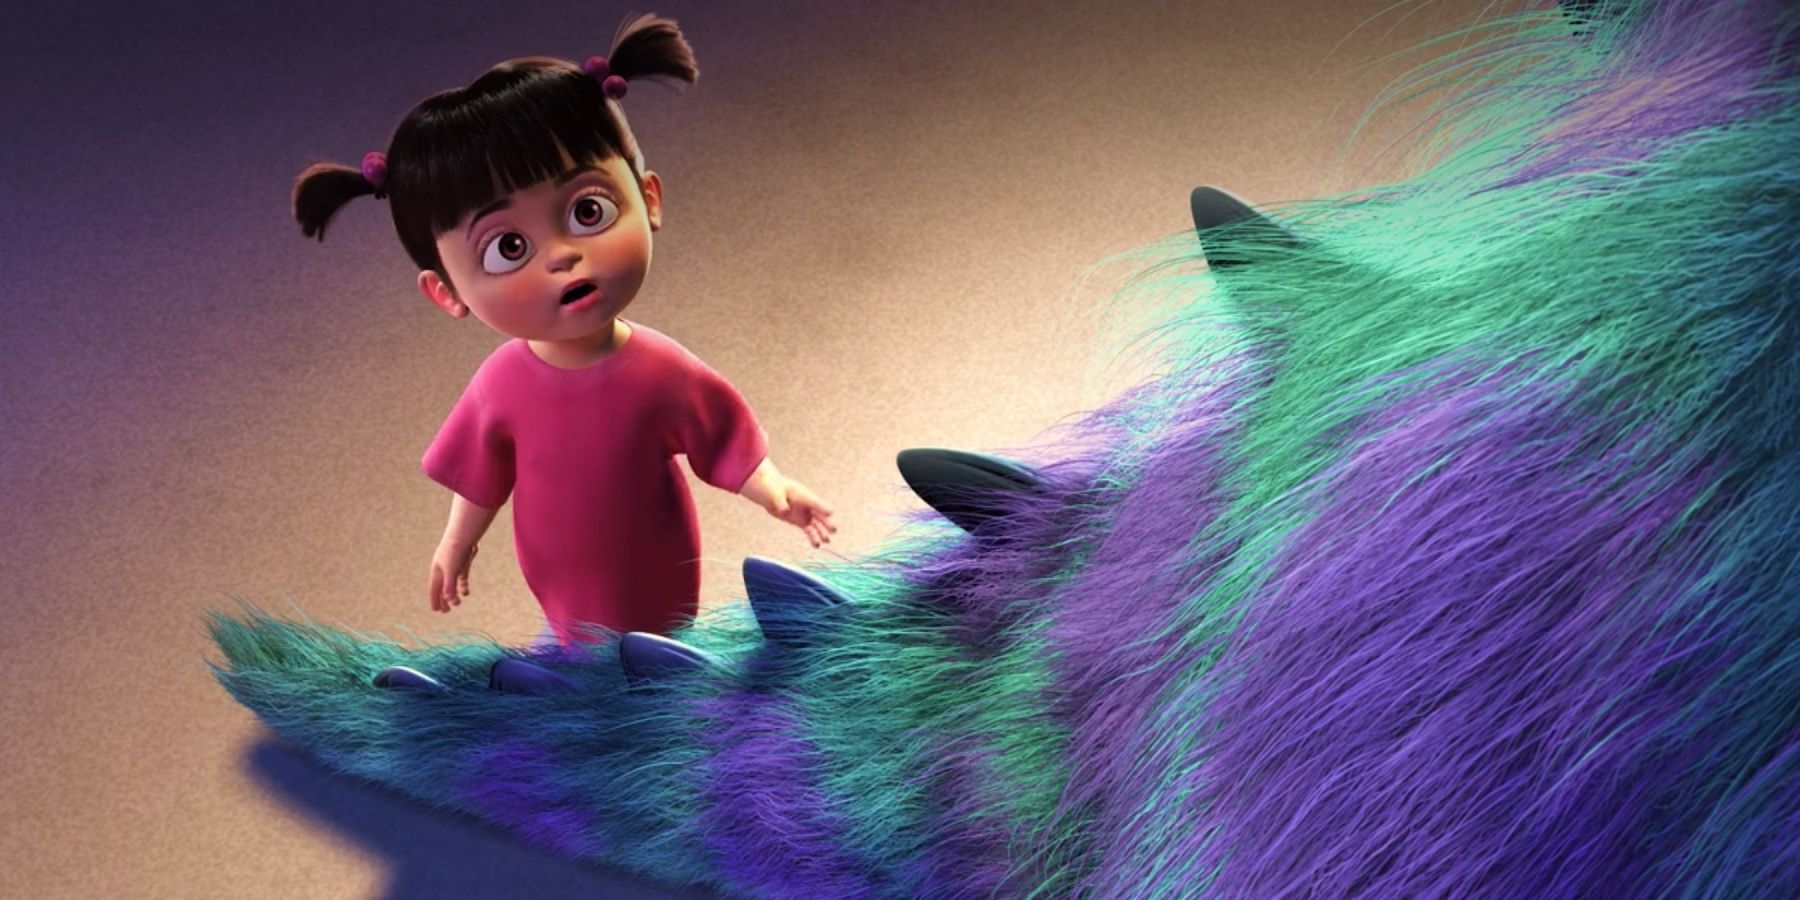 Is Priya queer in Turning Red? Pixar cinematographer appears to confirm  theories - PopBuzz